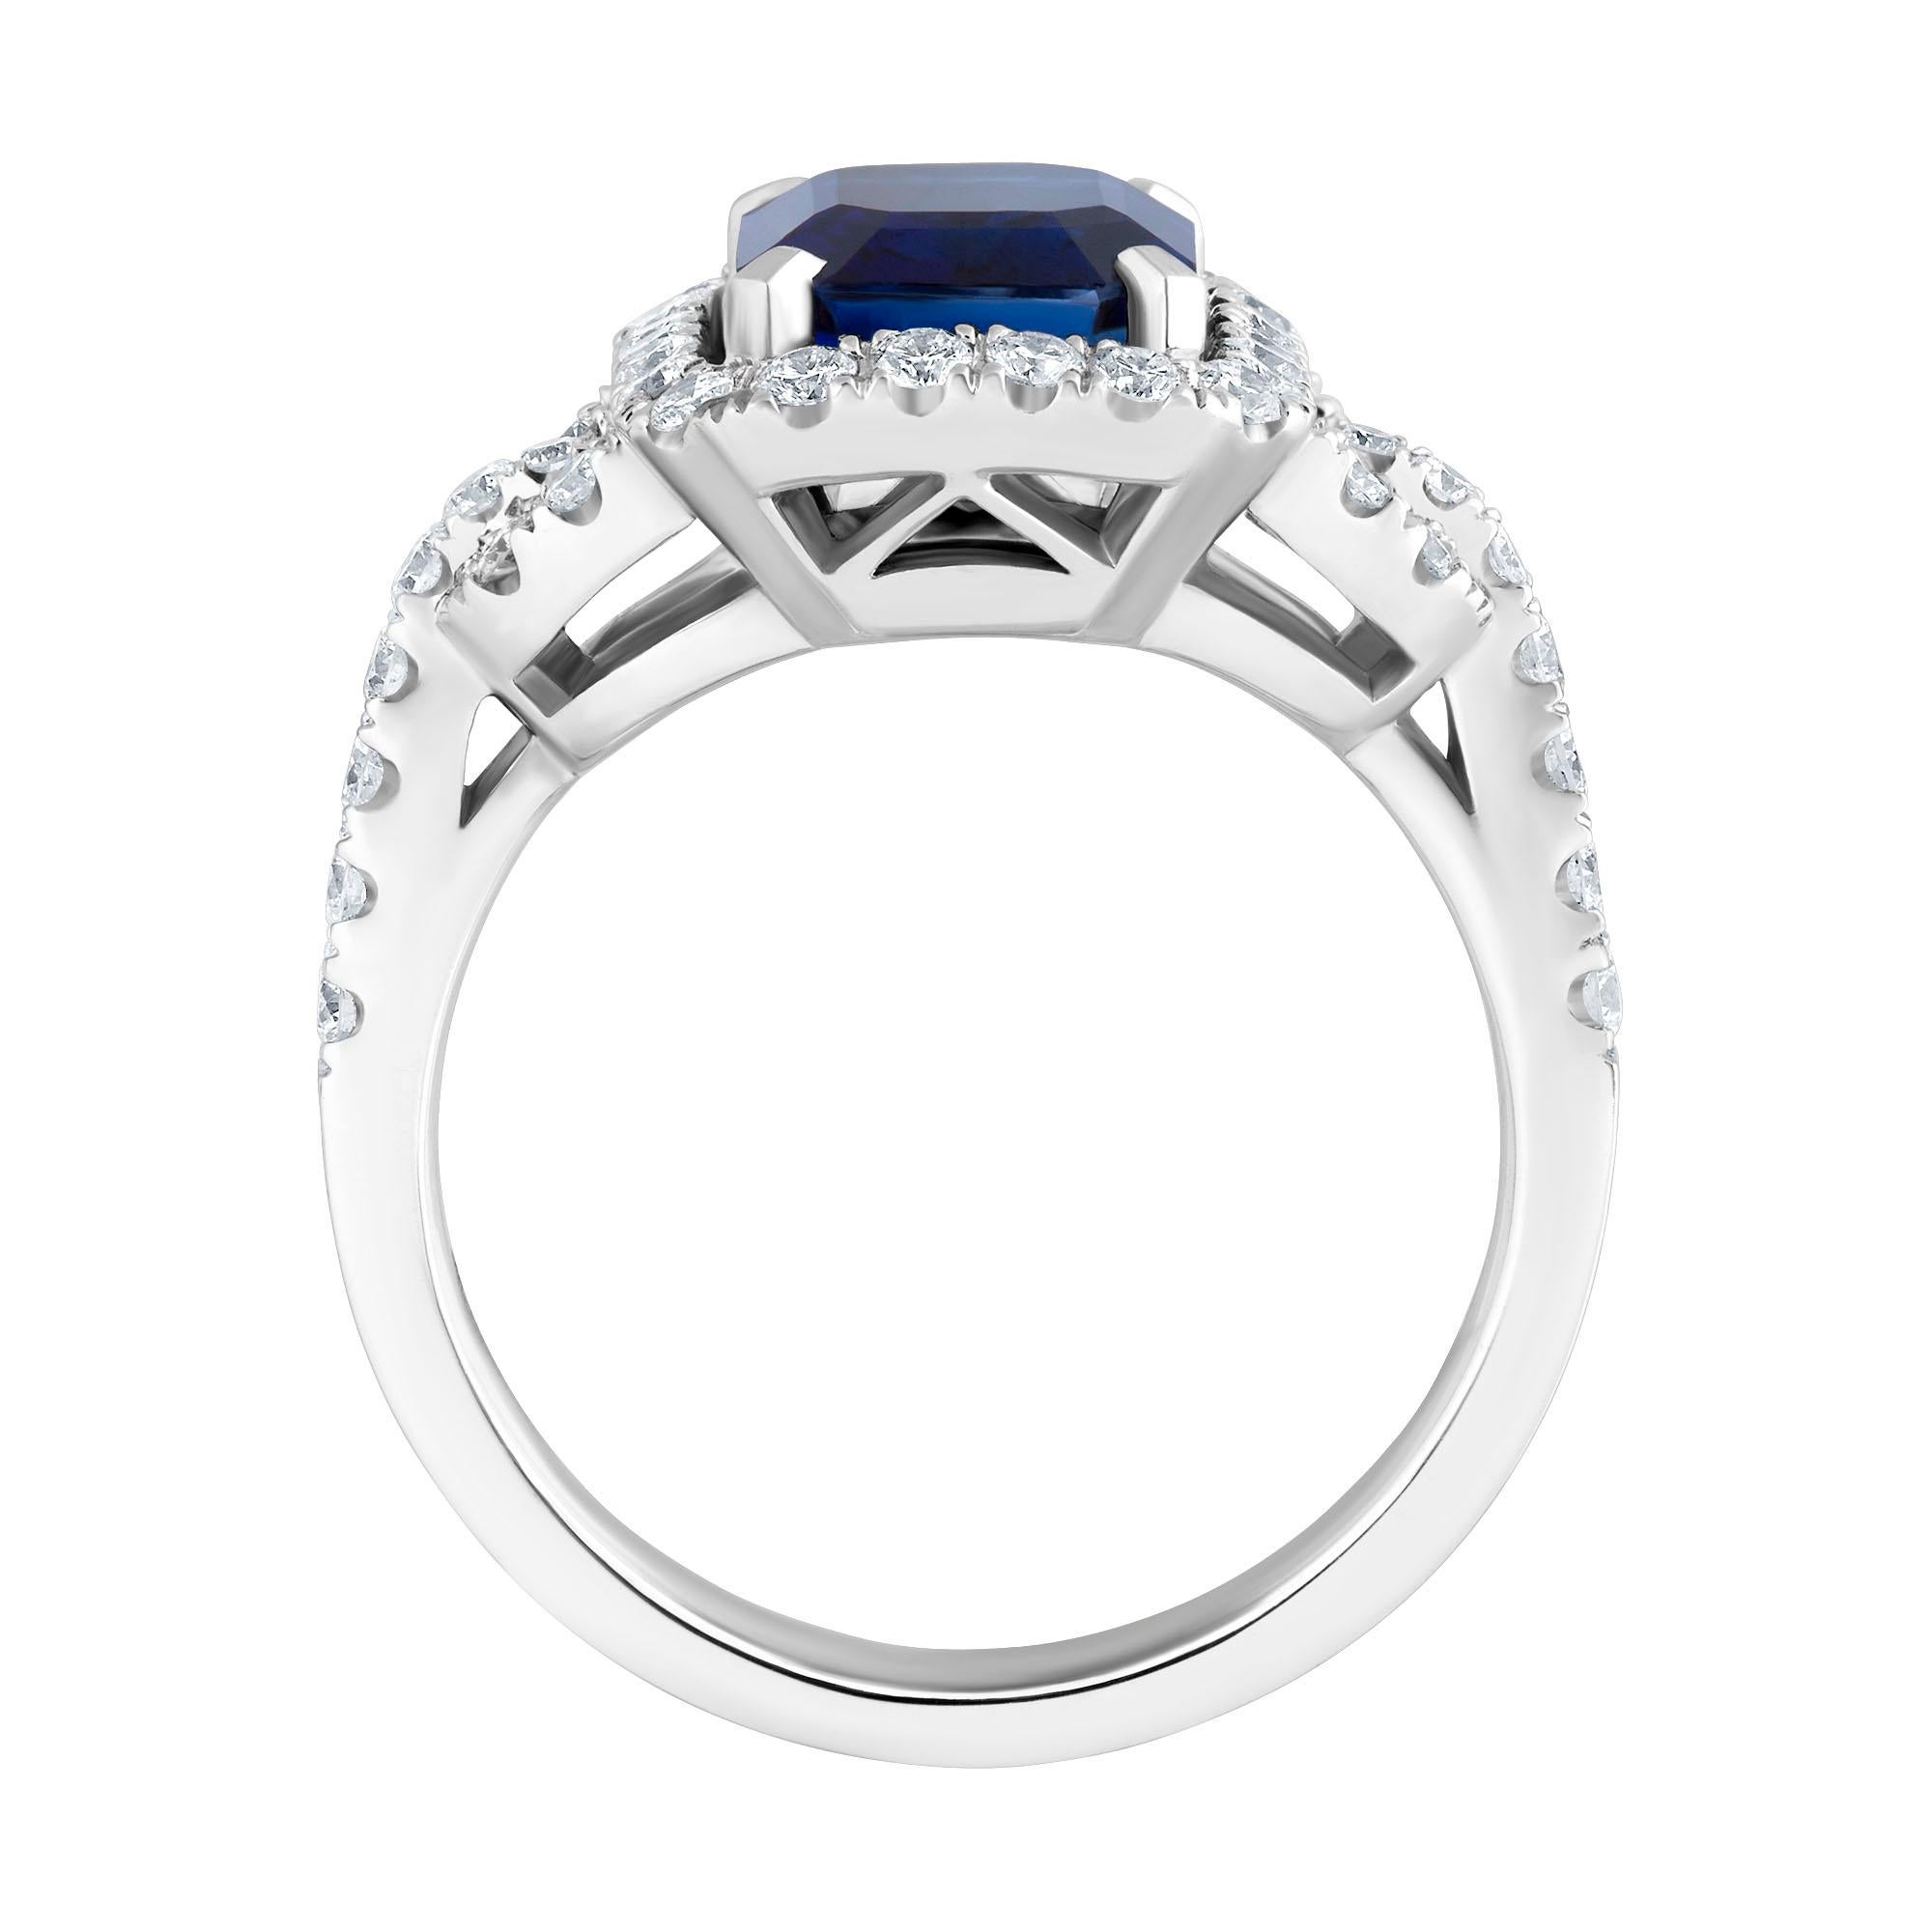 This ring was created by Emilio Jewelry in 18k white gold and the center stone is Grs Certified  sapphire as Vivid blue! 
Center weight: 4.10cts
Diamond quality: E-F Color VVs1 clarity 
Please Call our direct line 6468461904 8am-11pm daily closed on